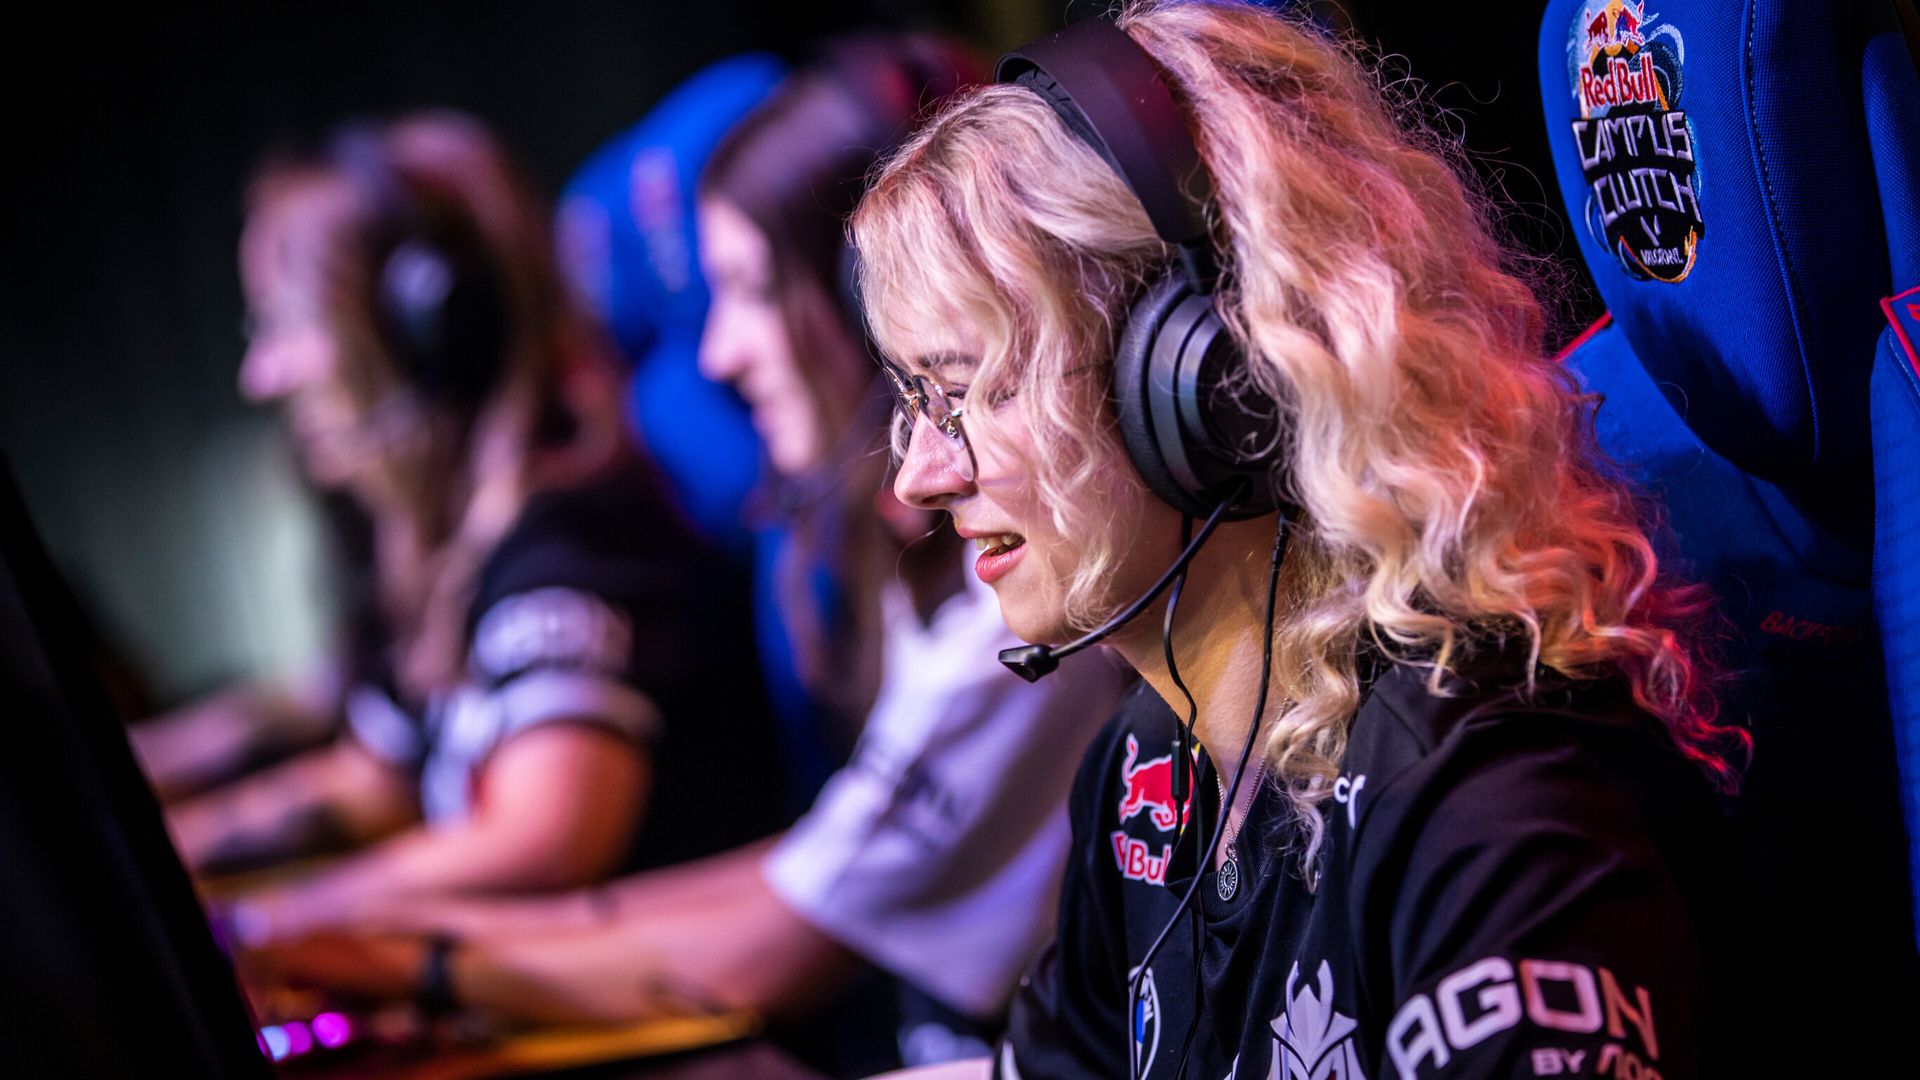 The female gamers competing for thousands of pounds at first event of its kind in UK